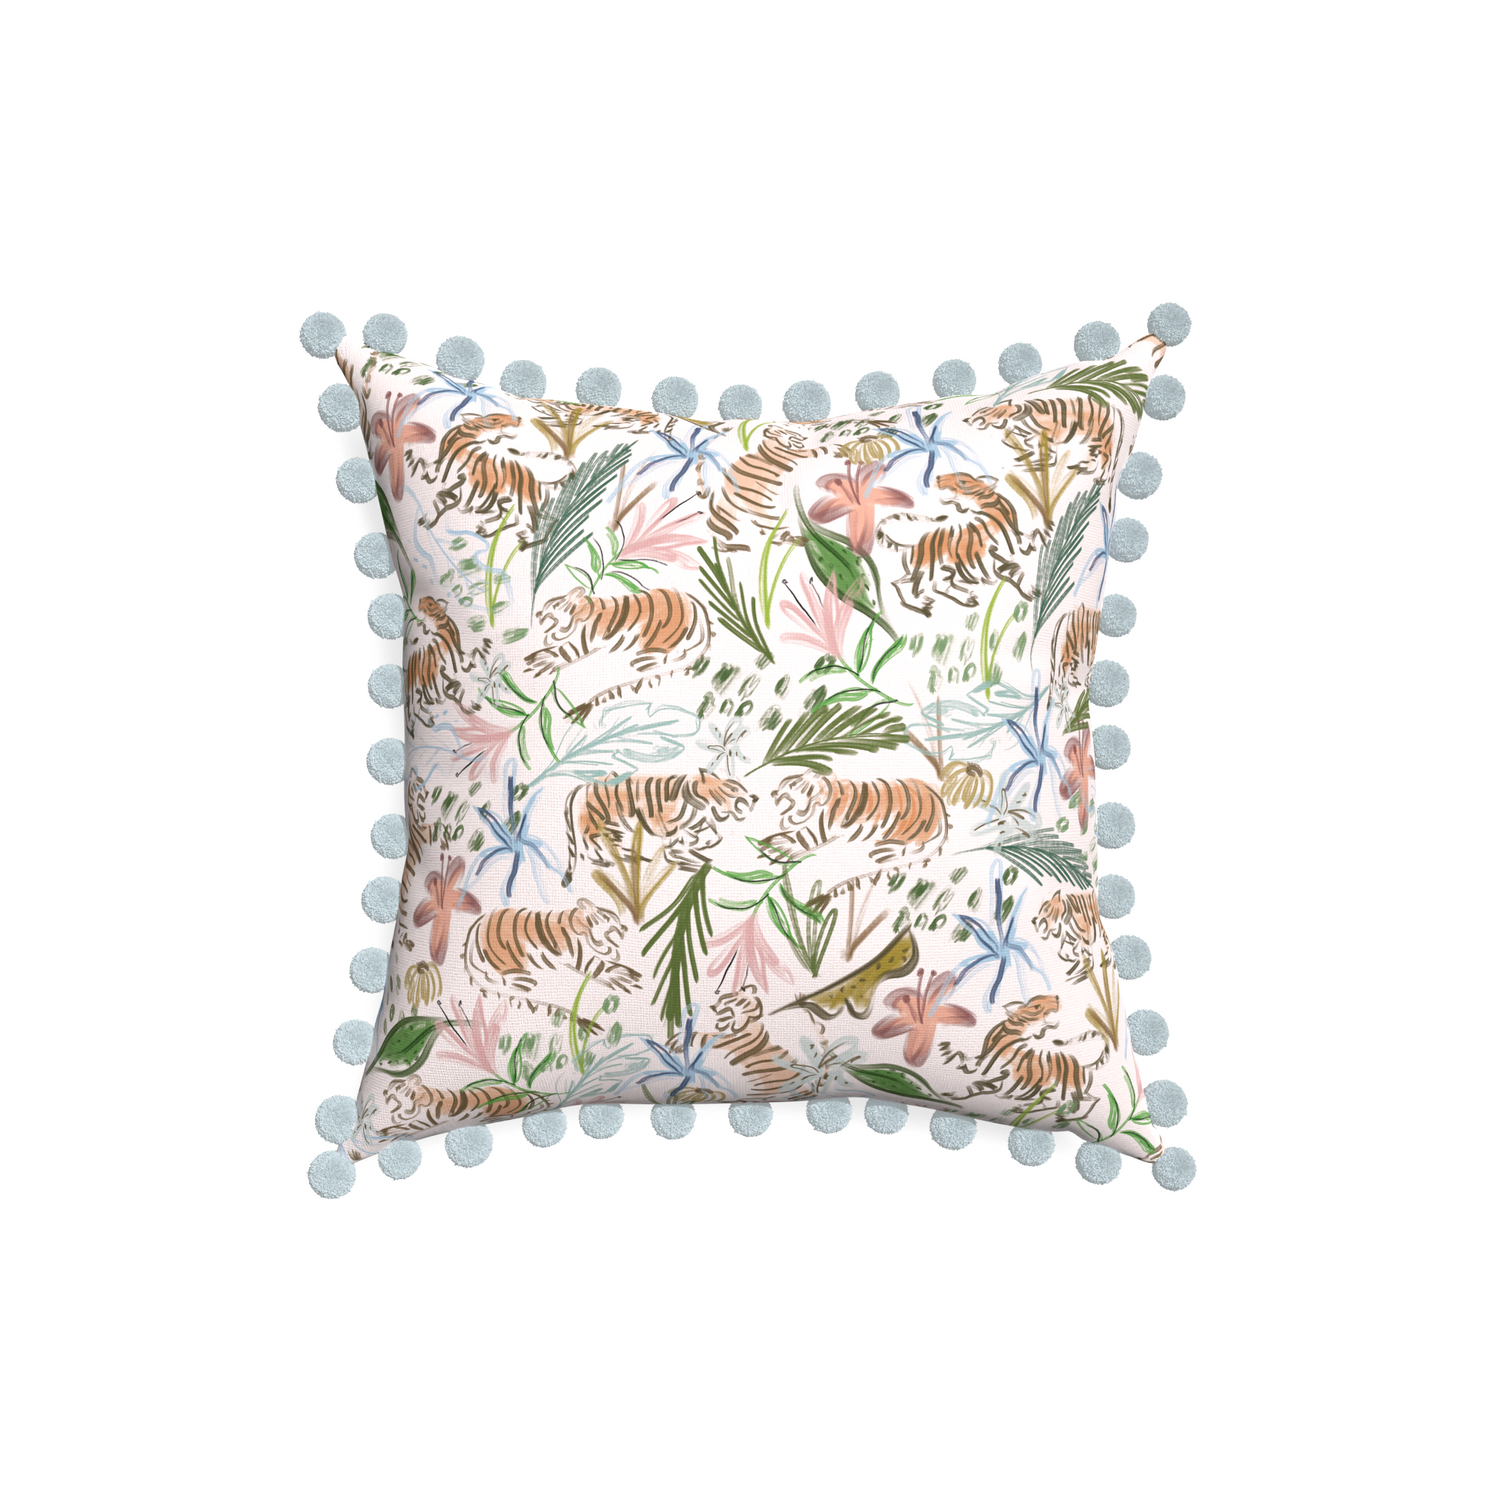 18-square frida pink custom pink chinoiserie tigerpillow with powder pom pom on white background